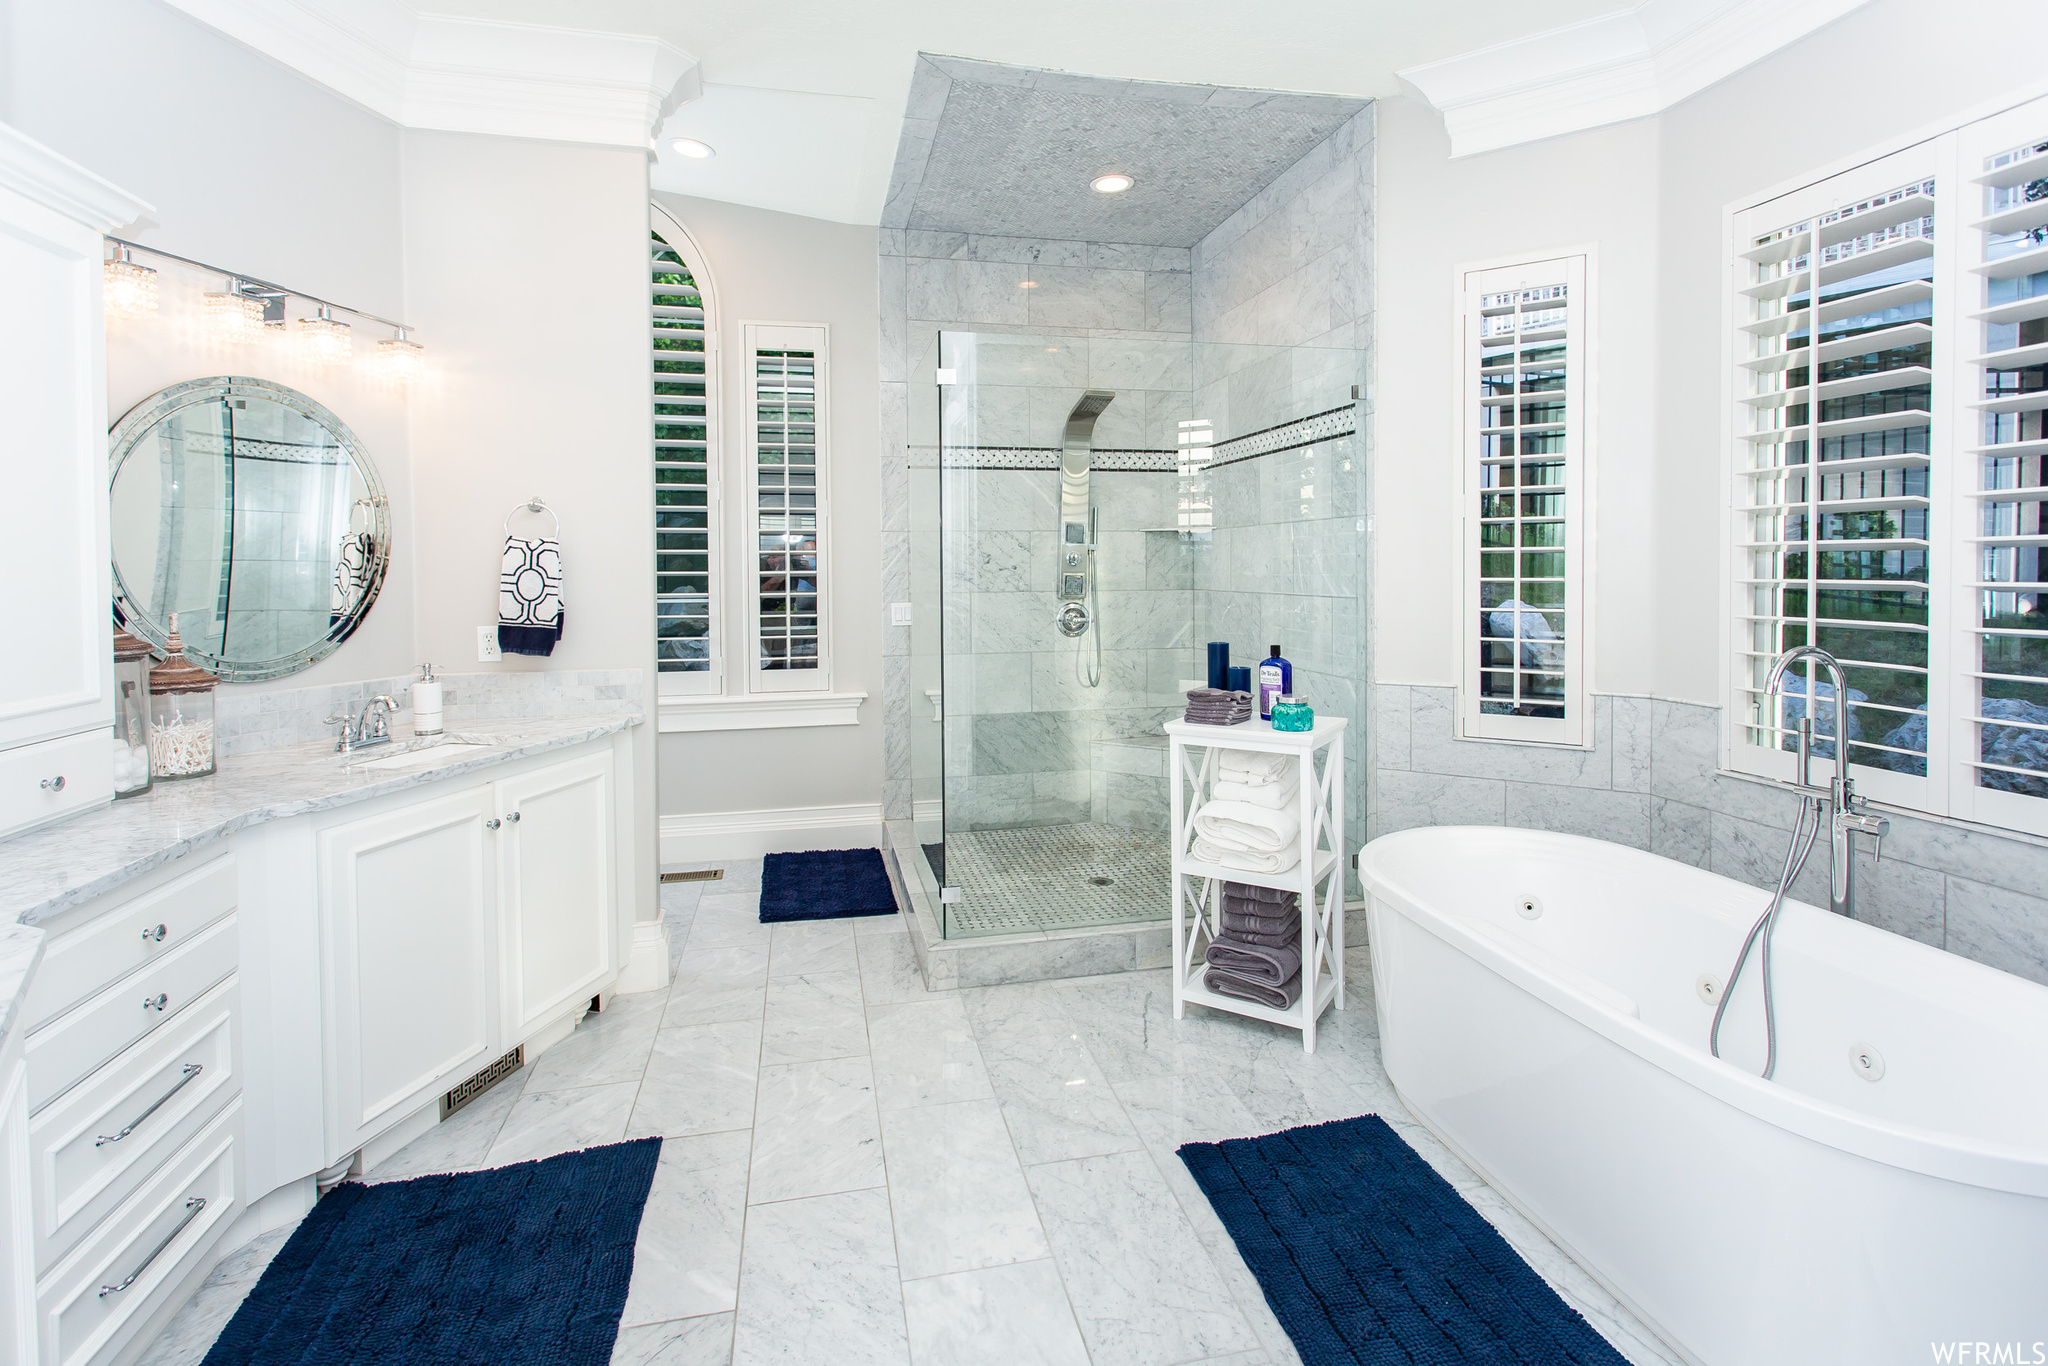 The master bathroom has marble floors, custom cabinets, soaker garden tub and separate Euro shower.